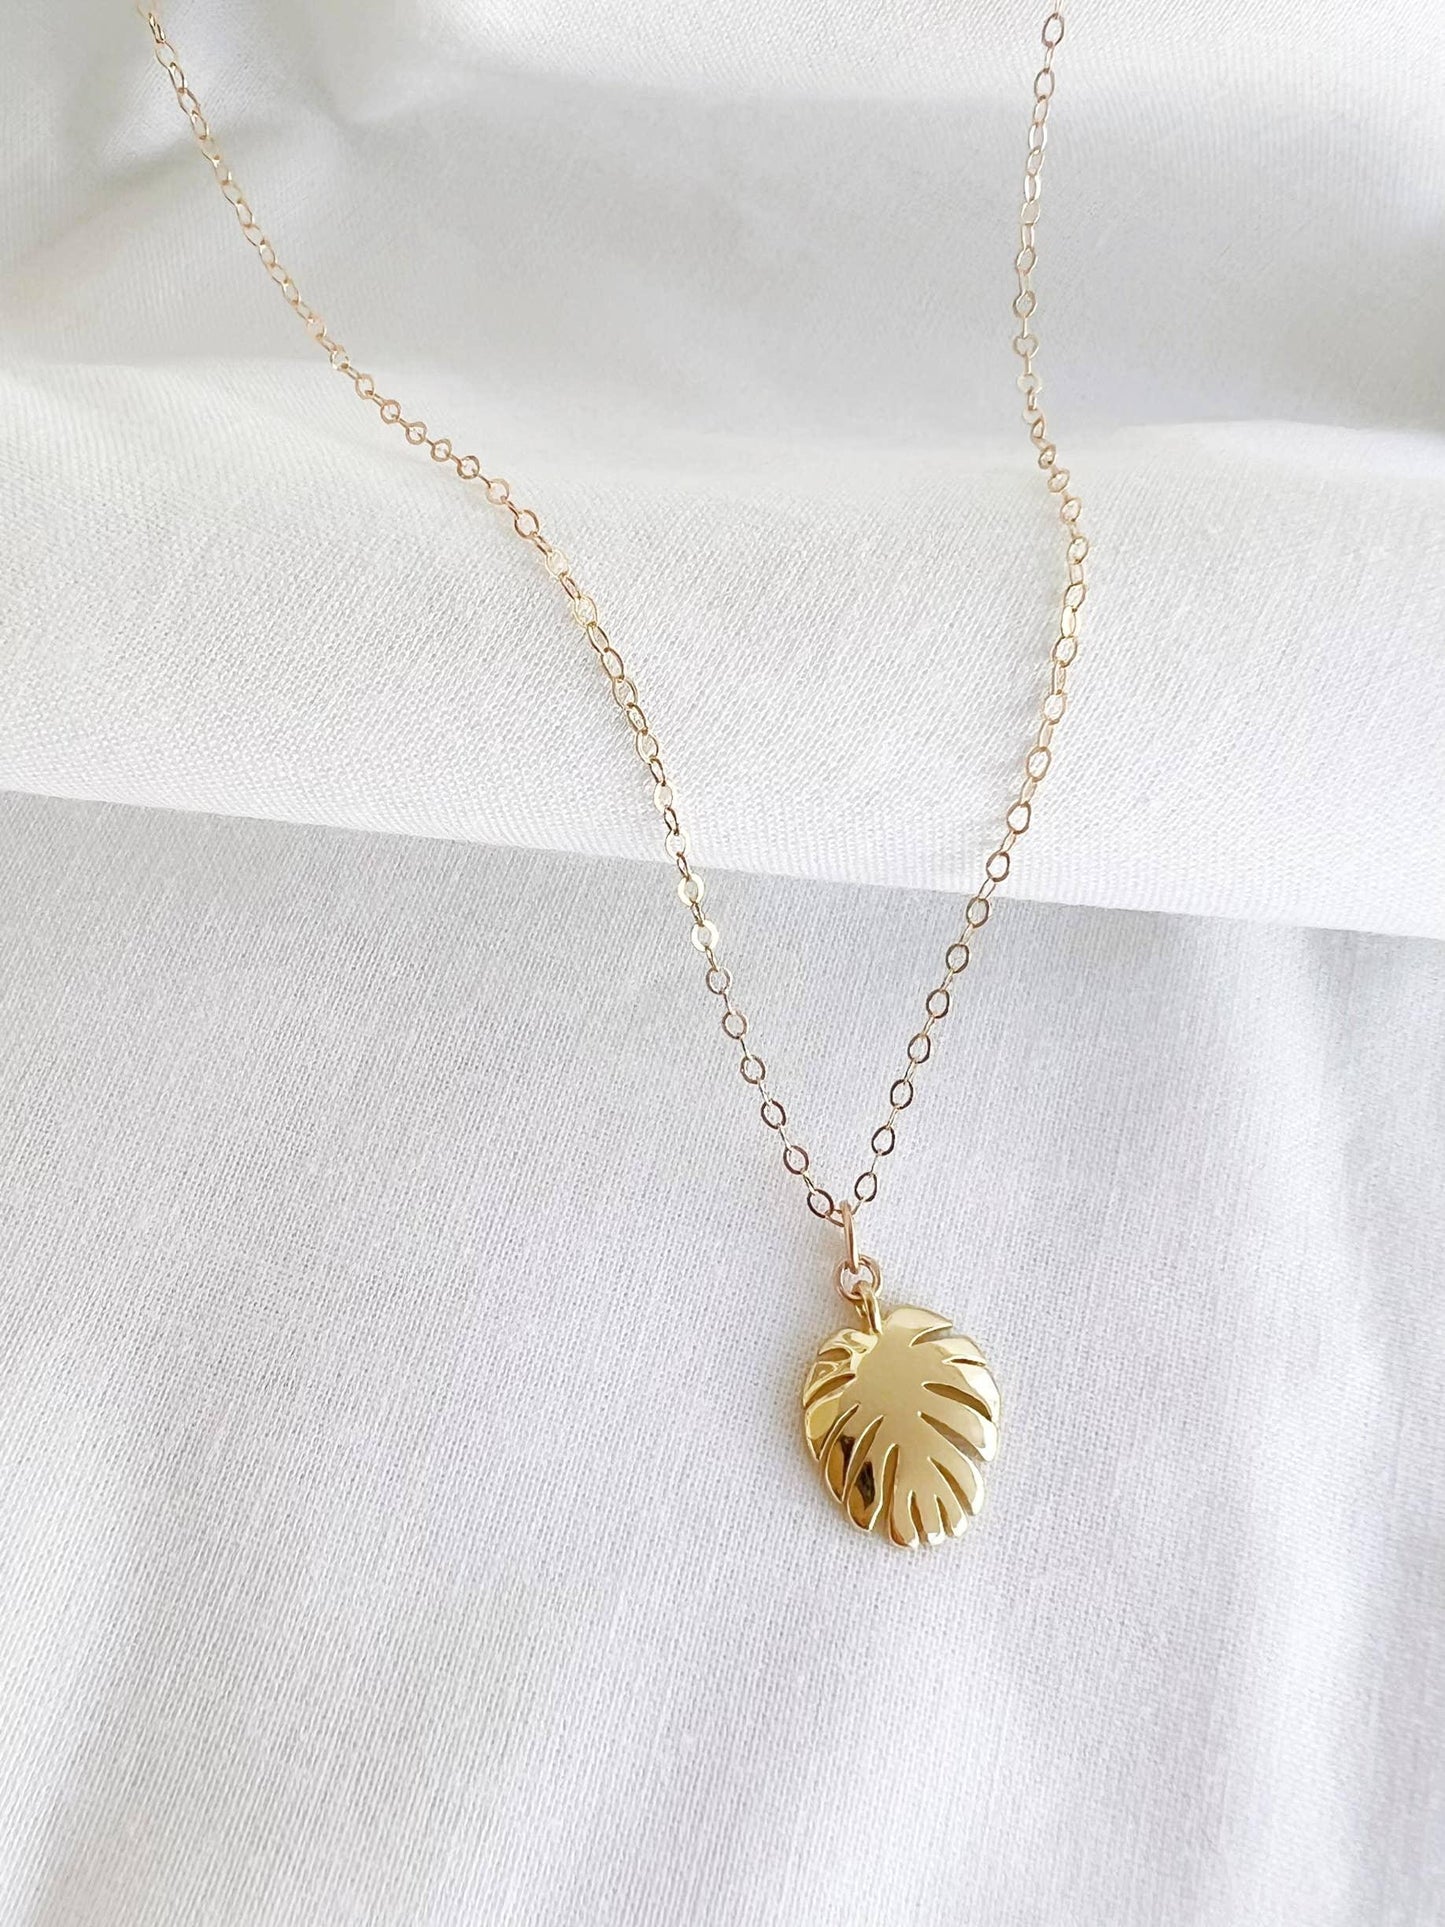 Monstera Leaf Necklace Gold Filled - The Silver Dahlia